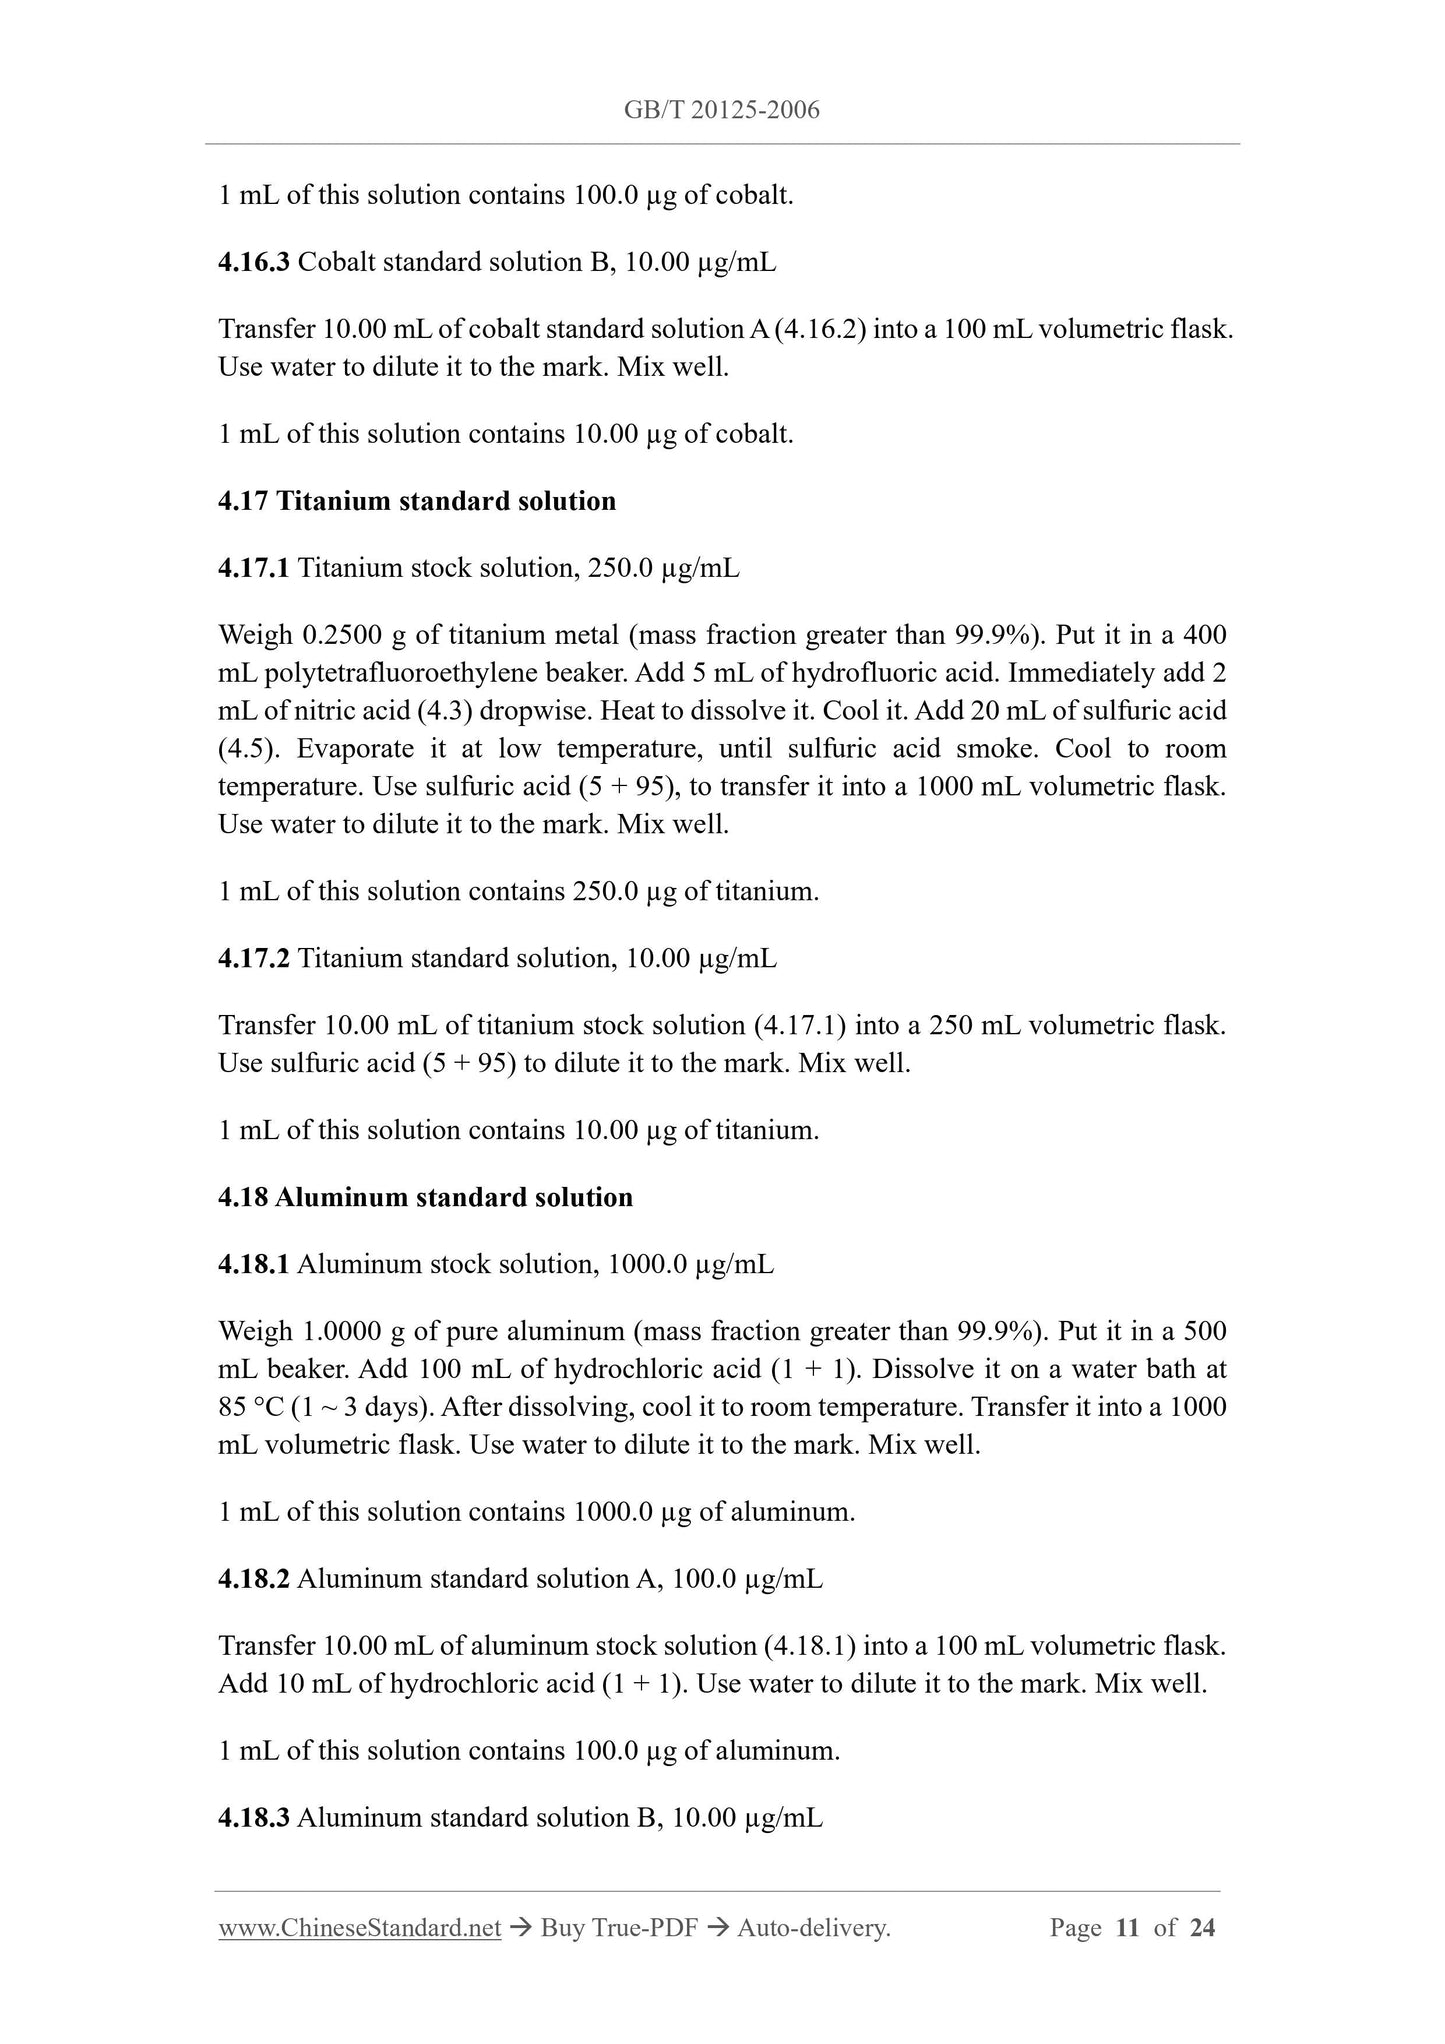 GB/T 20125-2006 Page 7